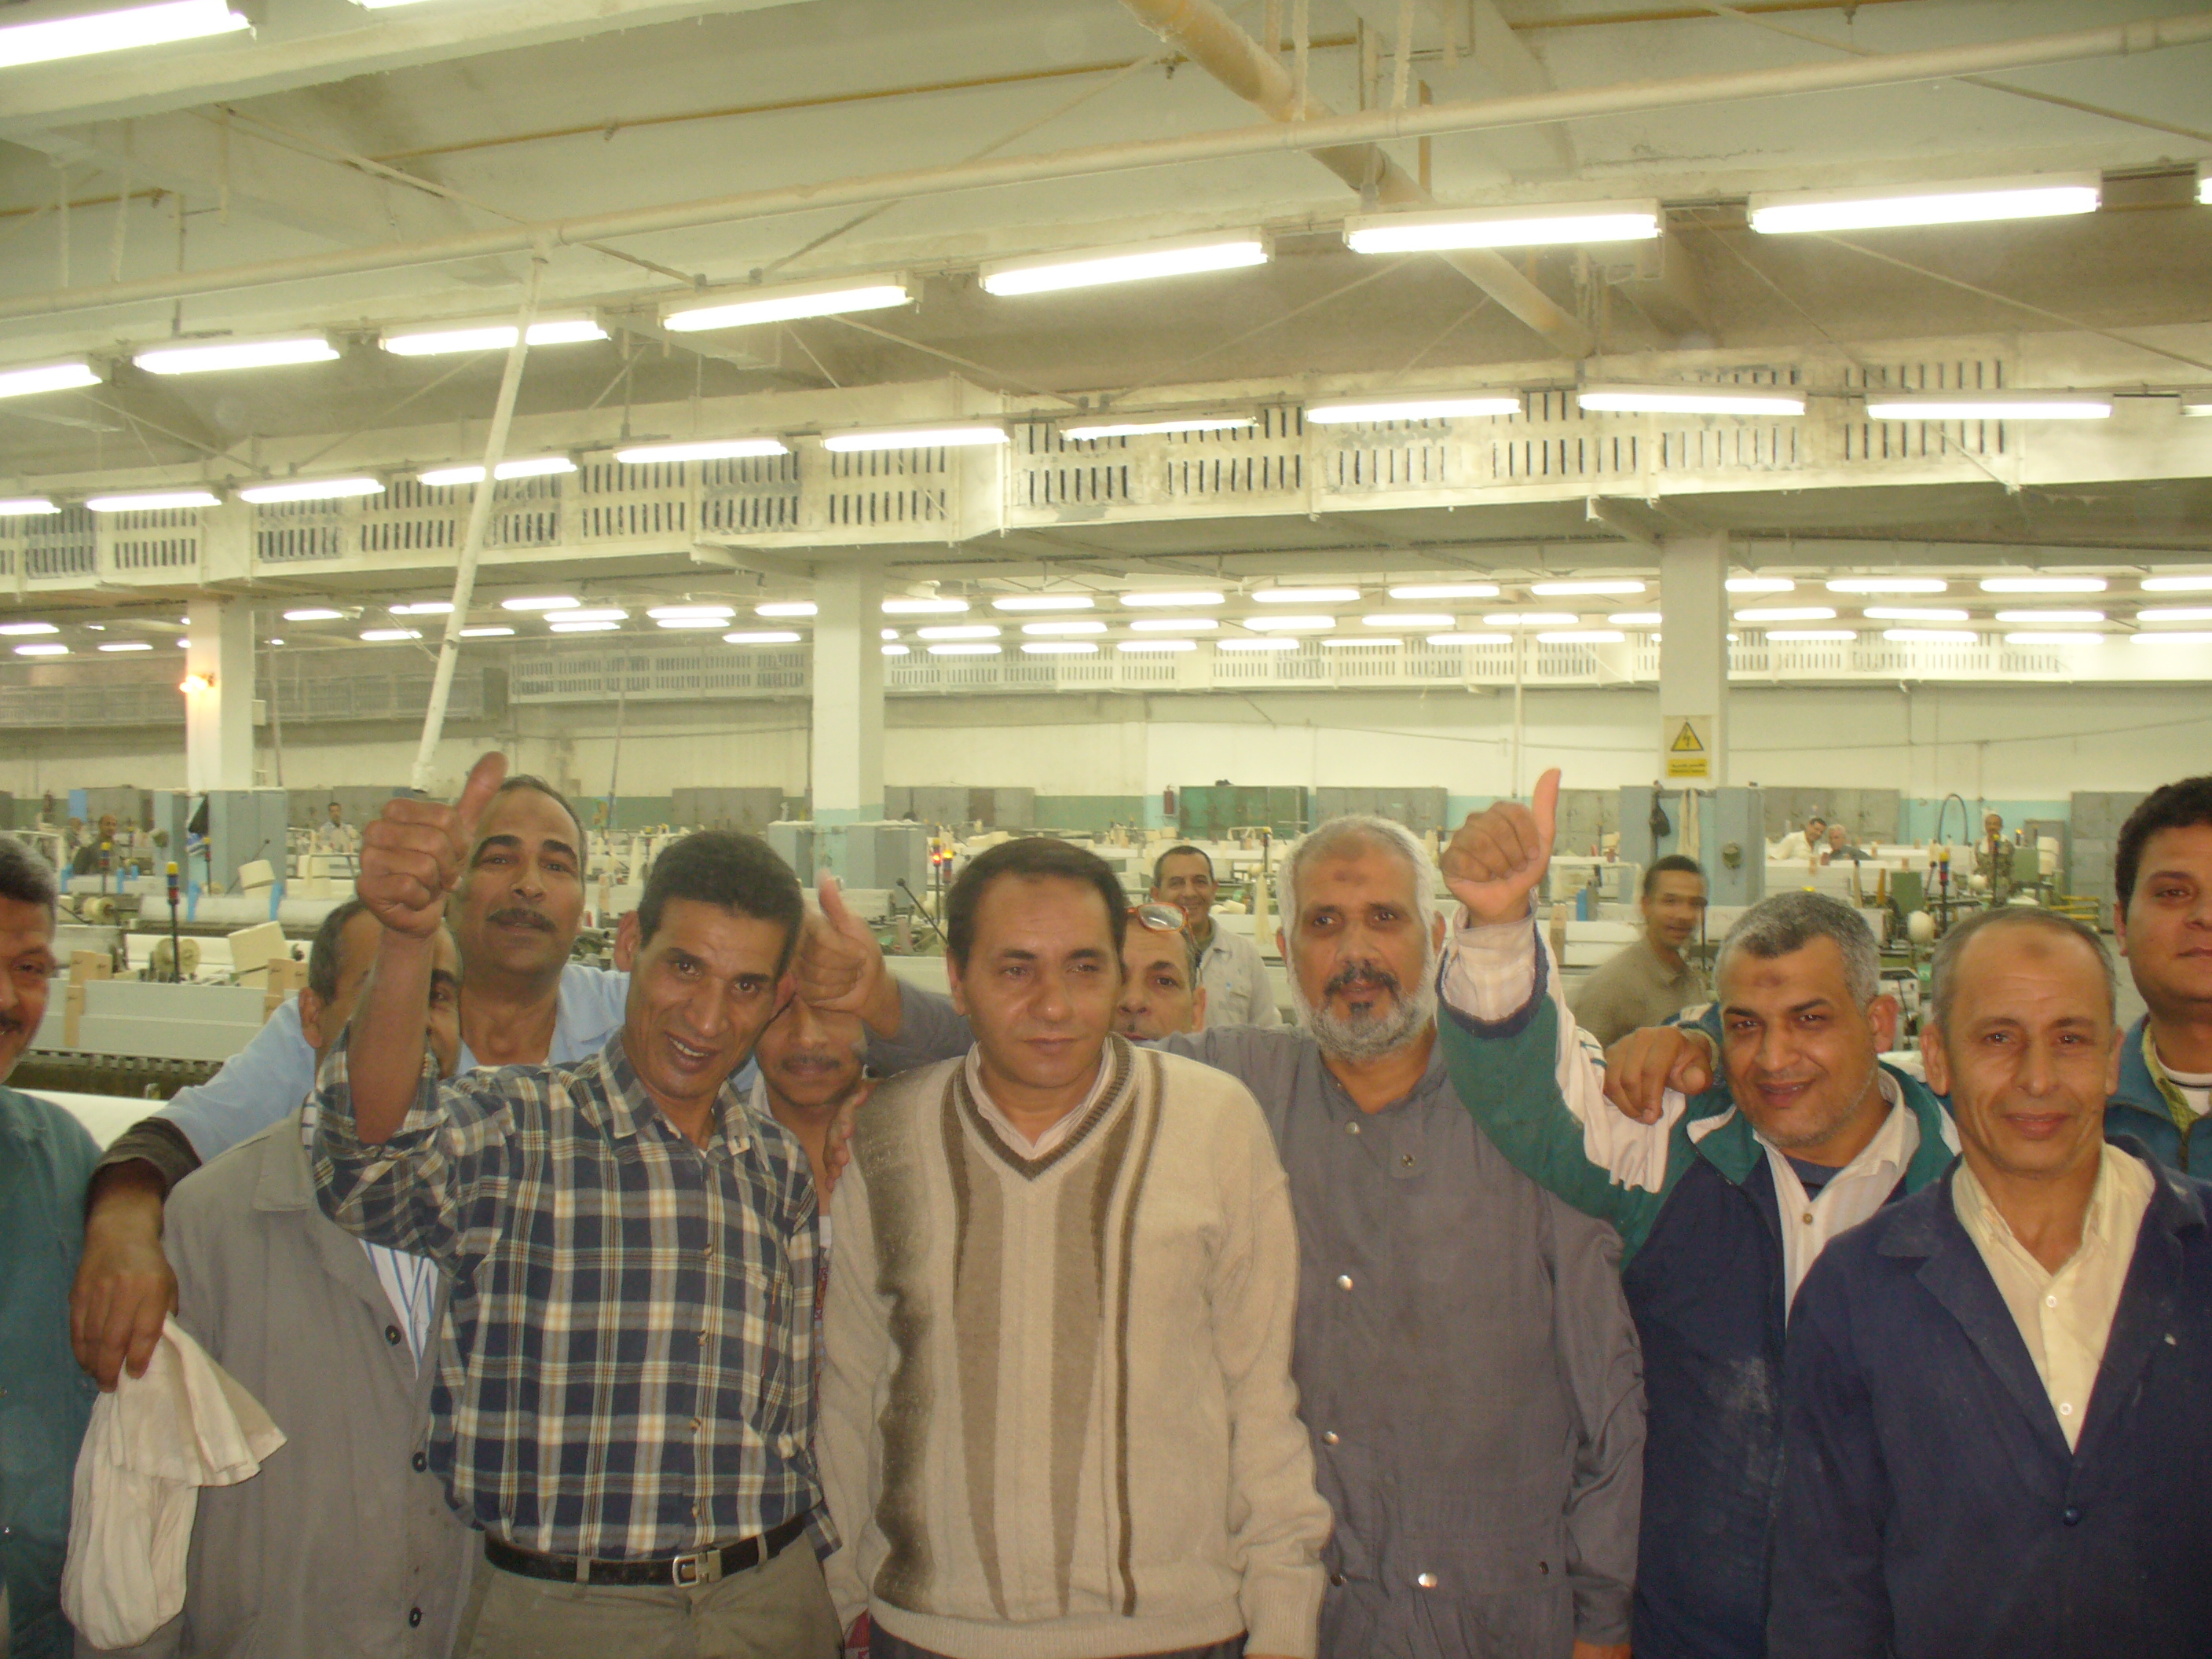 "Most of the workers I met at Al Mahalla felt that they were let down by their workers' representatives," writes Jano Charbel, who took this photo inside the Ghazl el-Mahalla company.